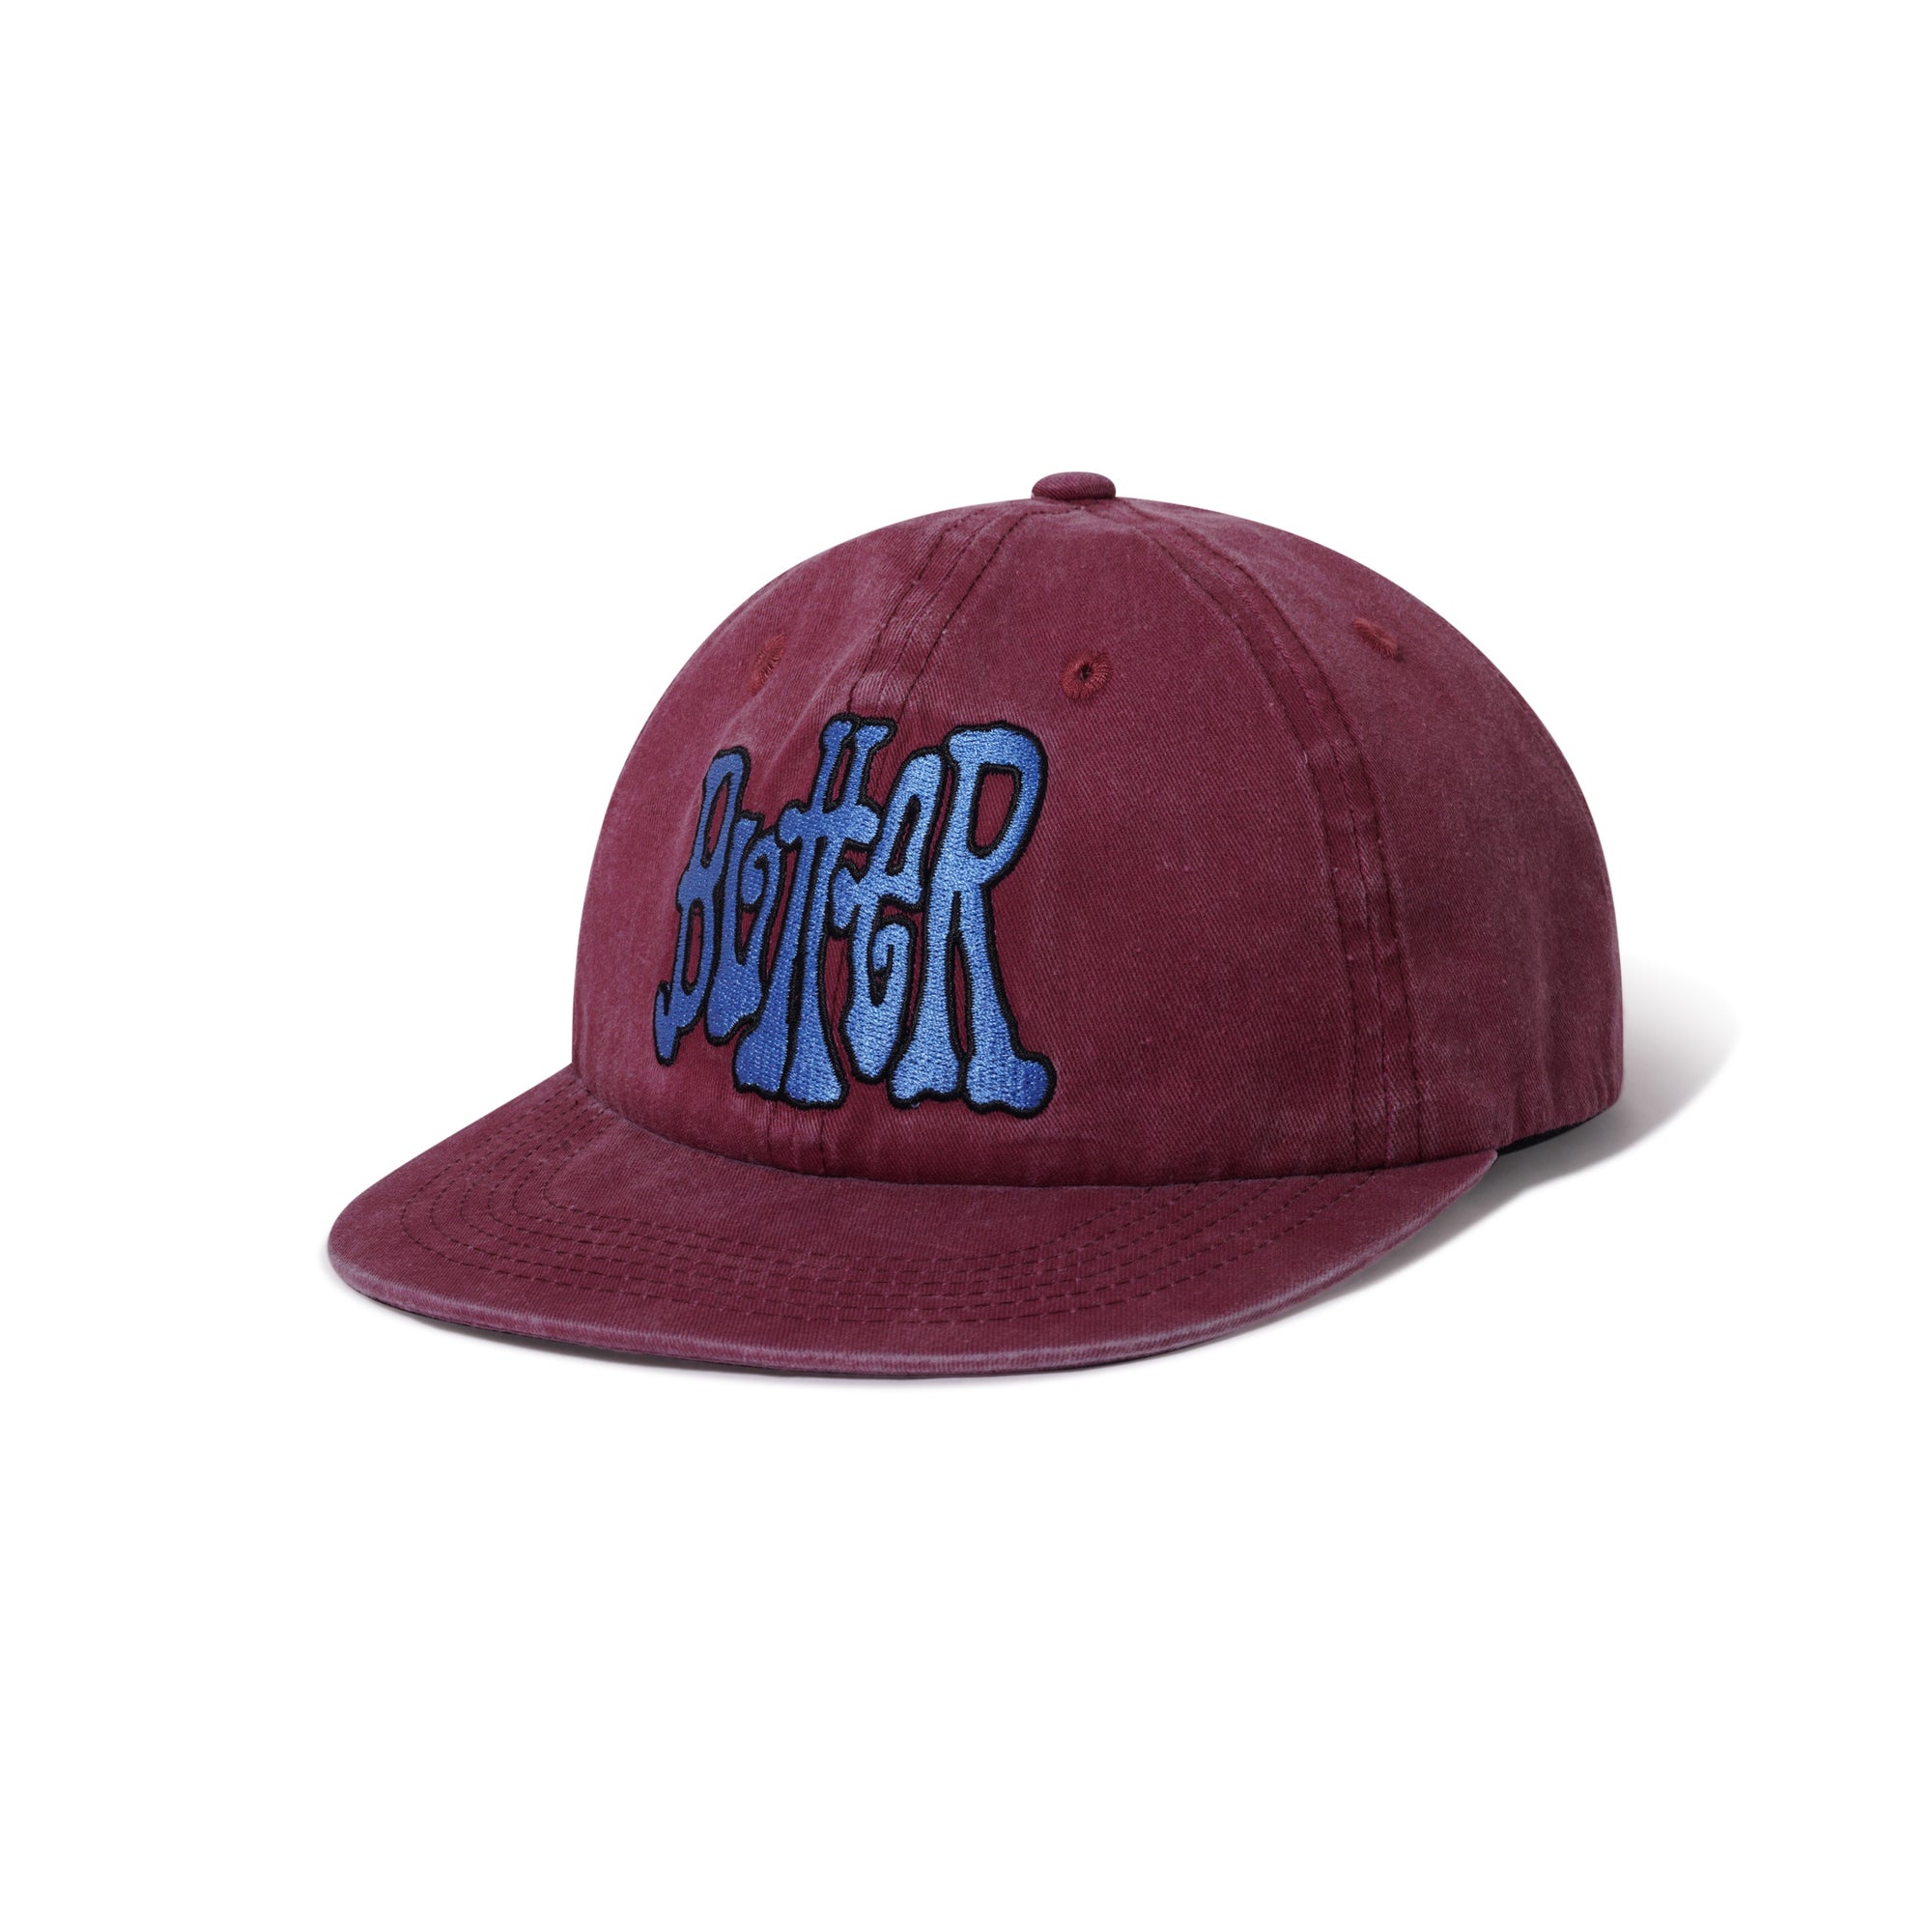 Butter Goods Tour 6 Panel Cap Washed Brick